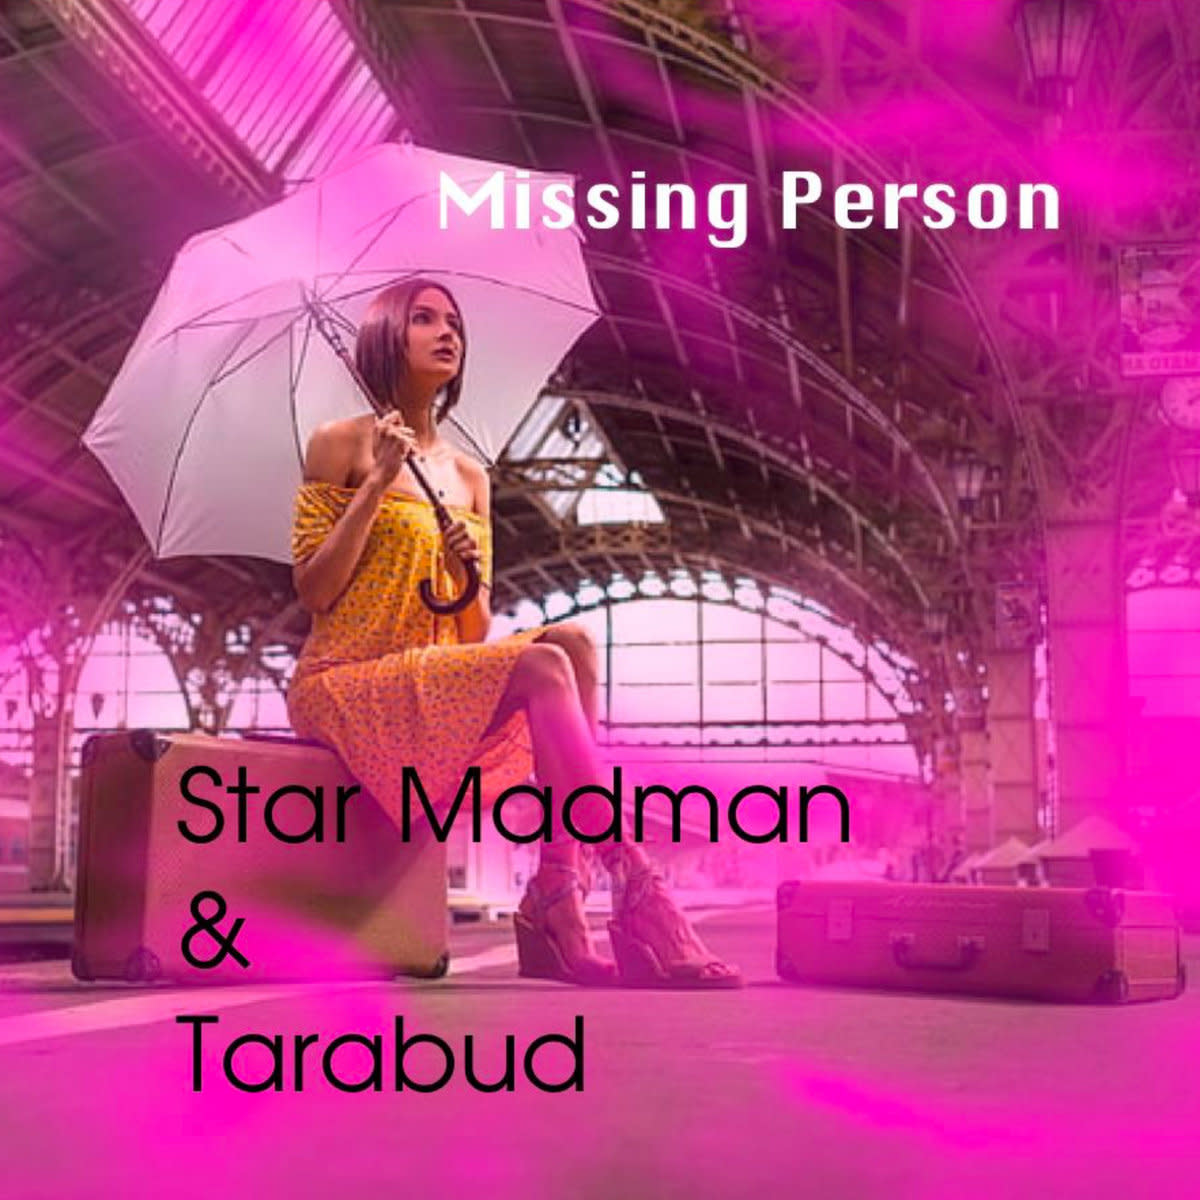 synth-single-review-missing-person-by-star-madman-tarabud